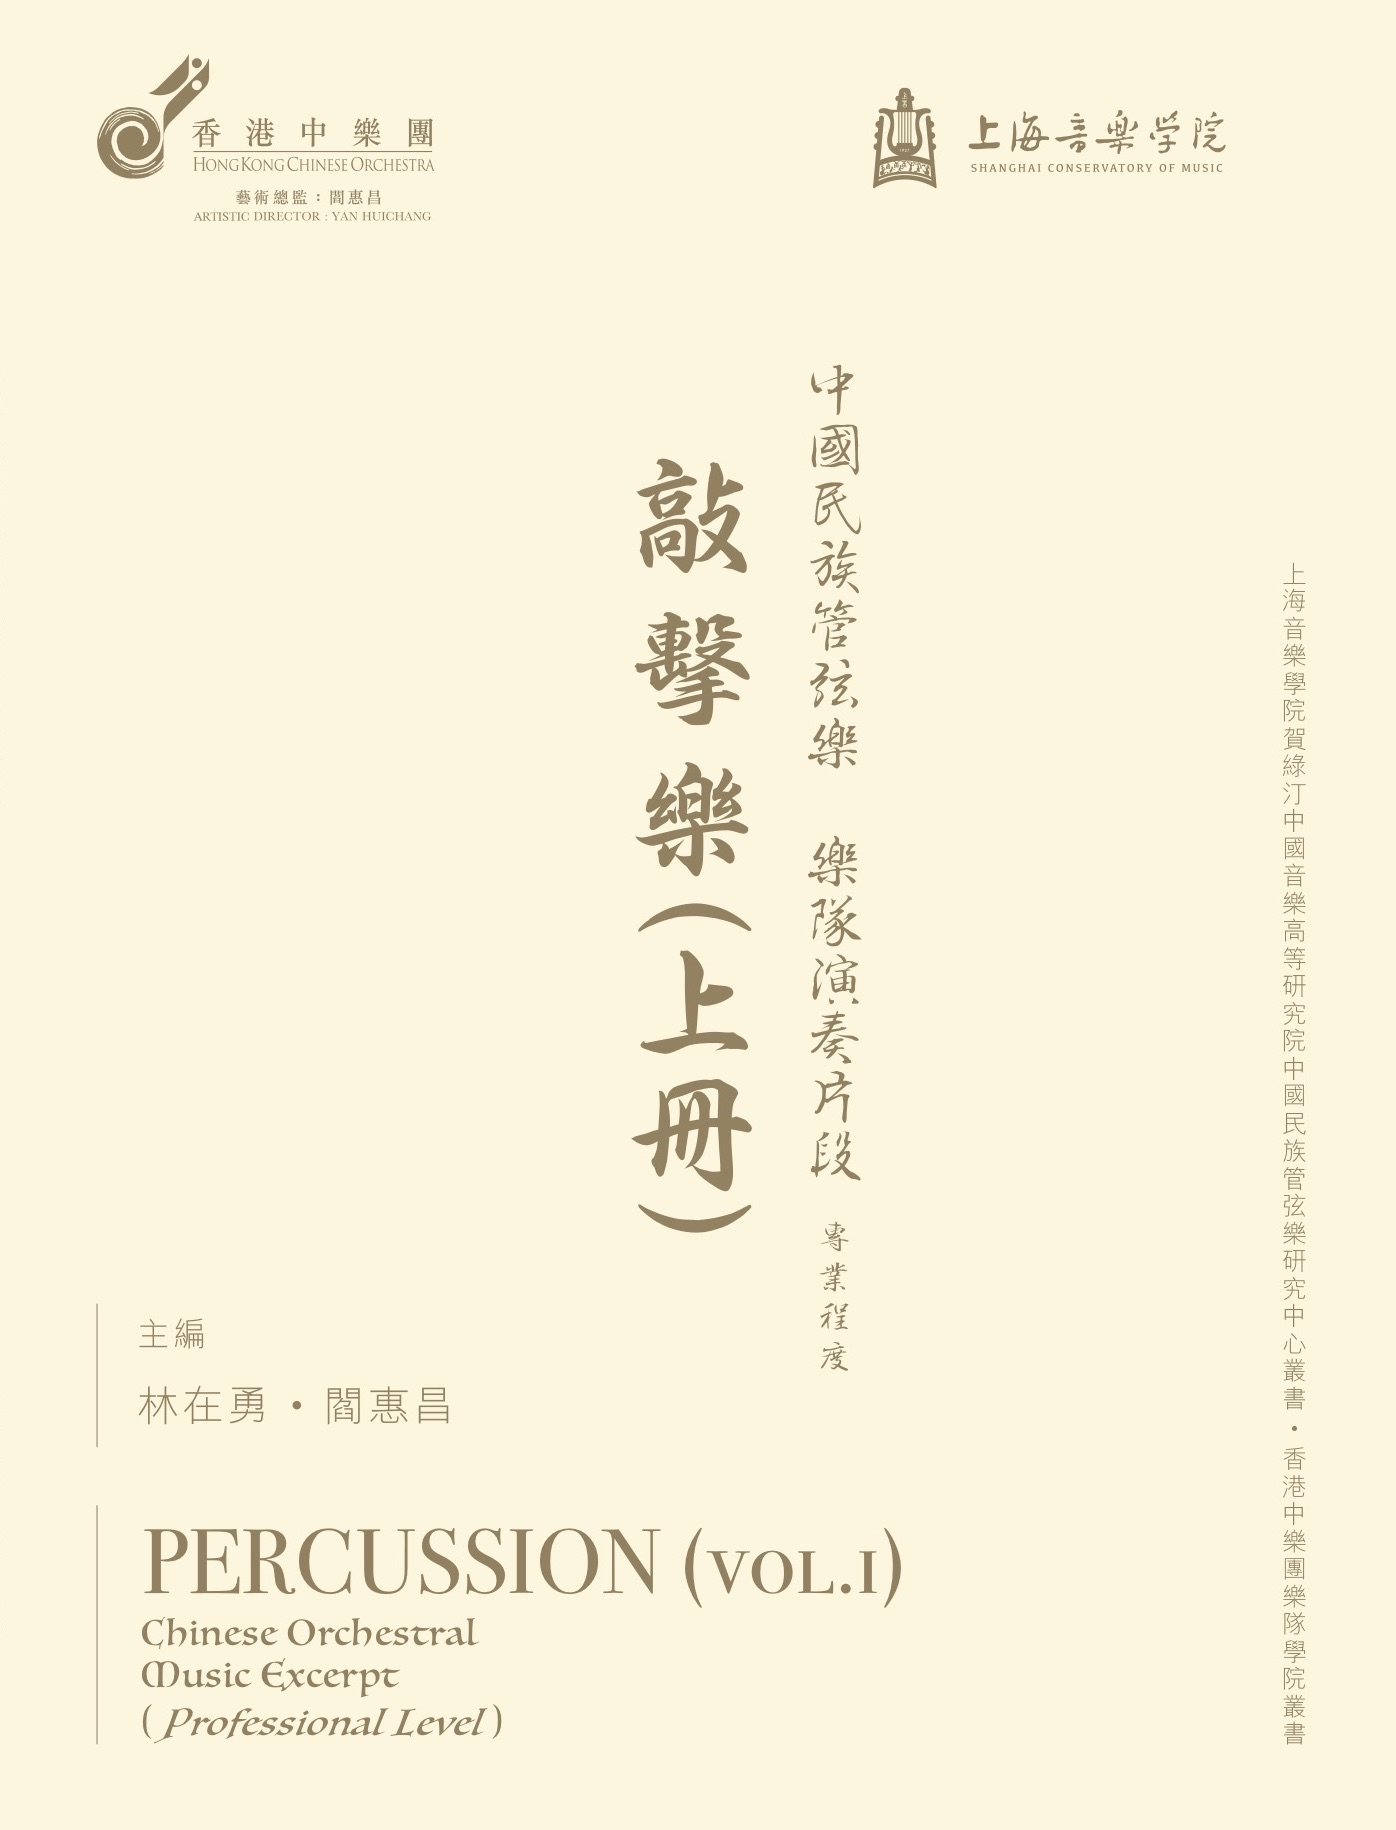 Percussion(VOL.1)Chinese Orchestral Music Excerpt